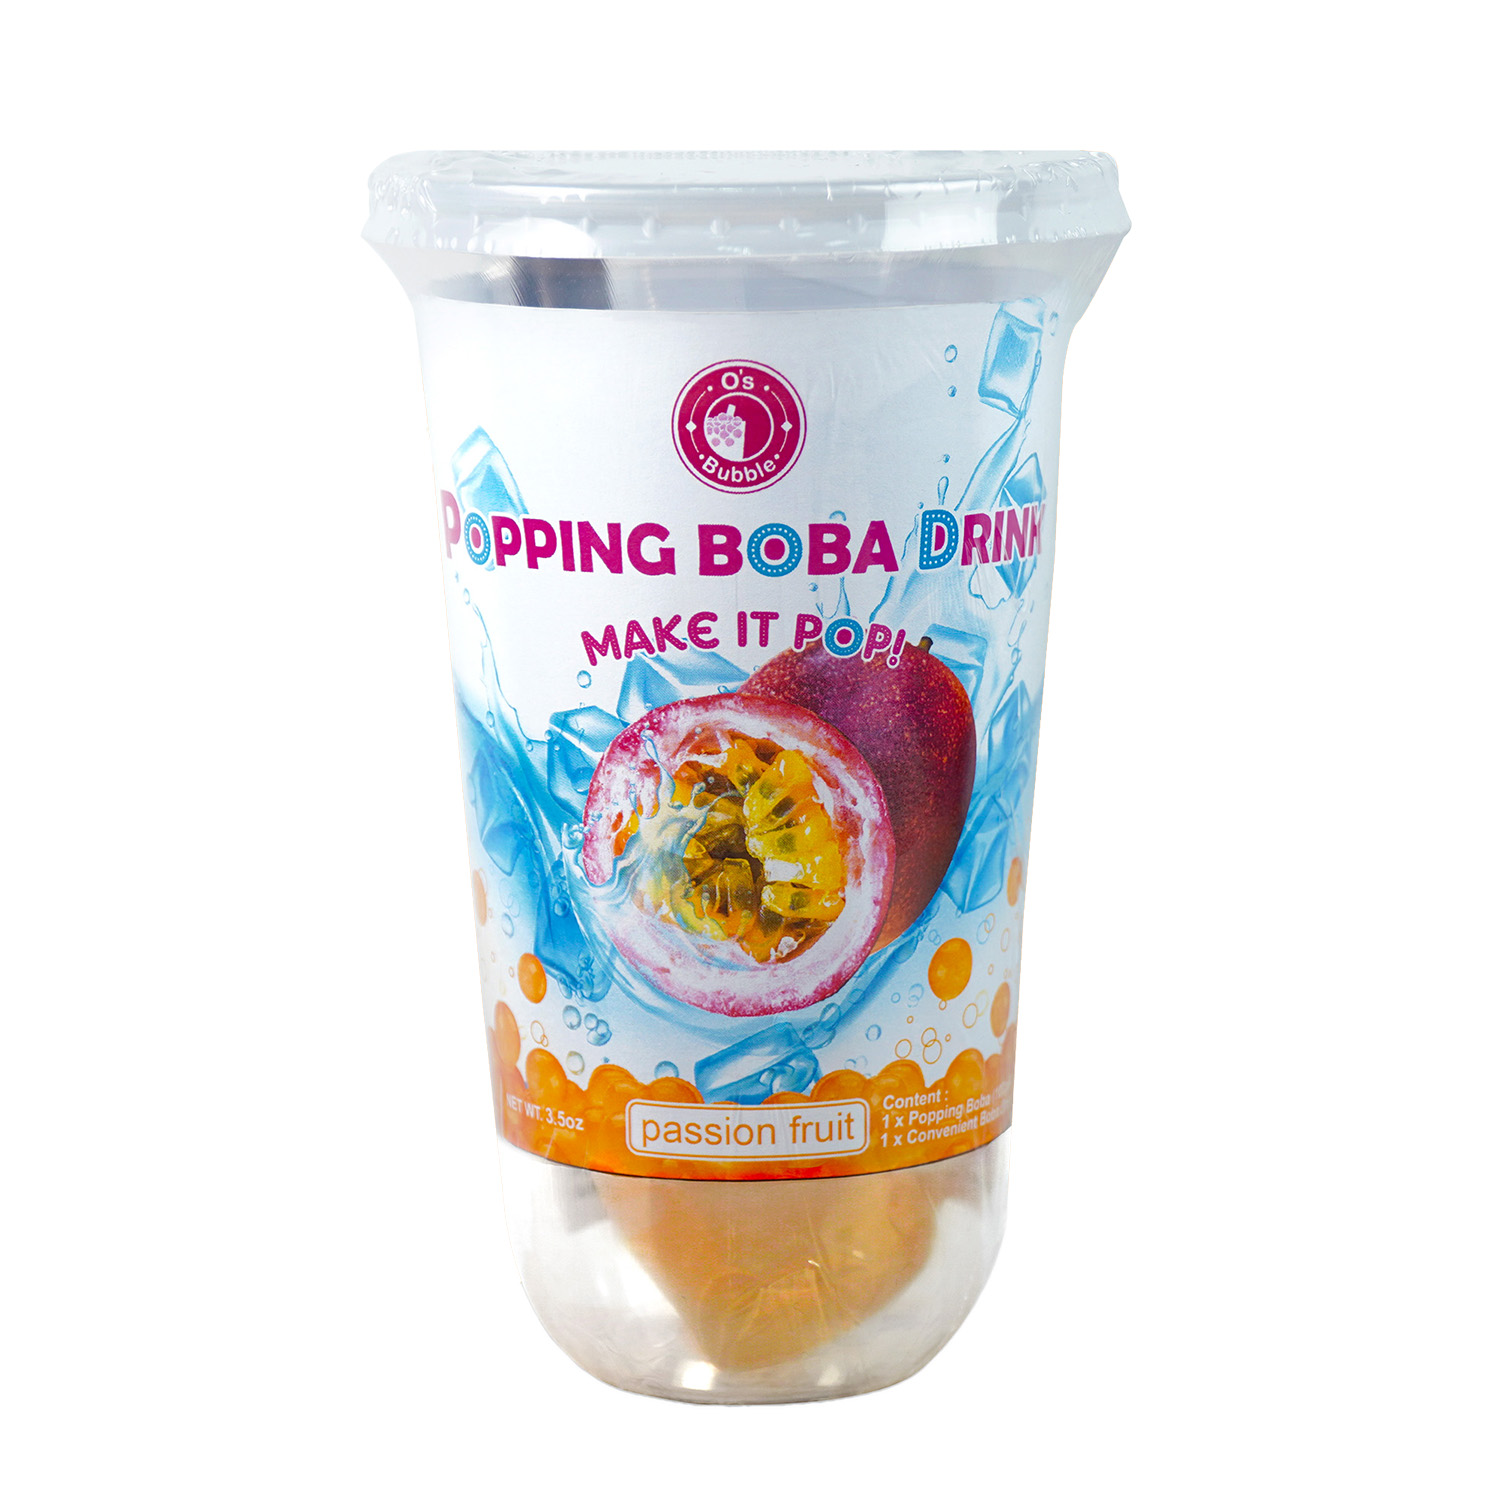 https://www.osbubble.com/wp-content/uploads/2021/01/popping-boba-cup-passion-fruit.jpg